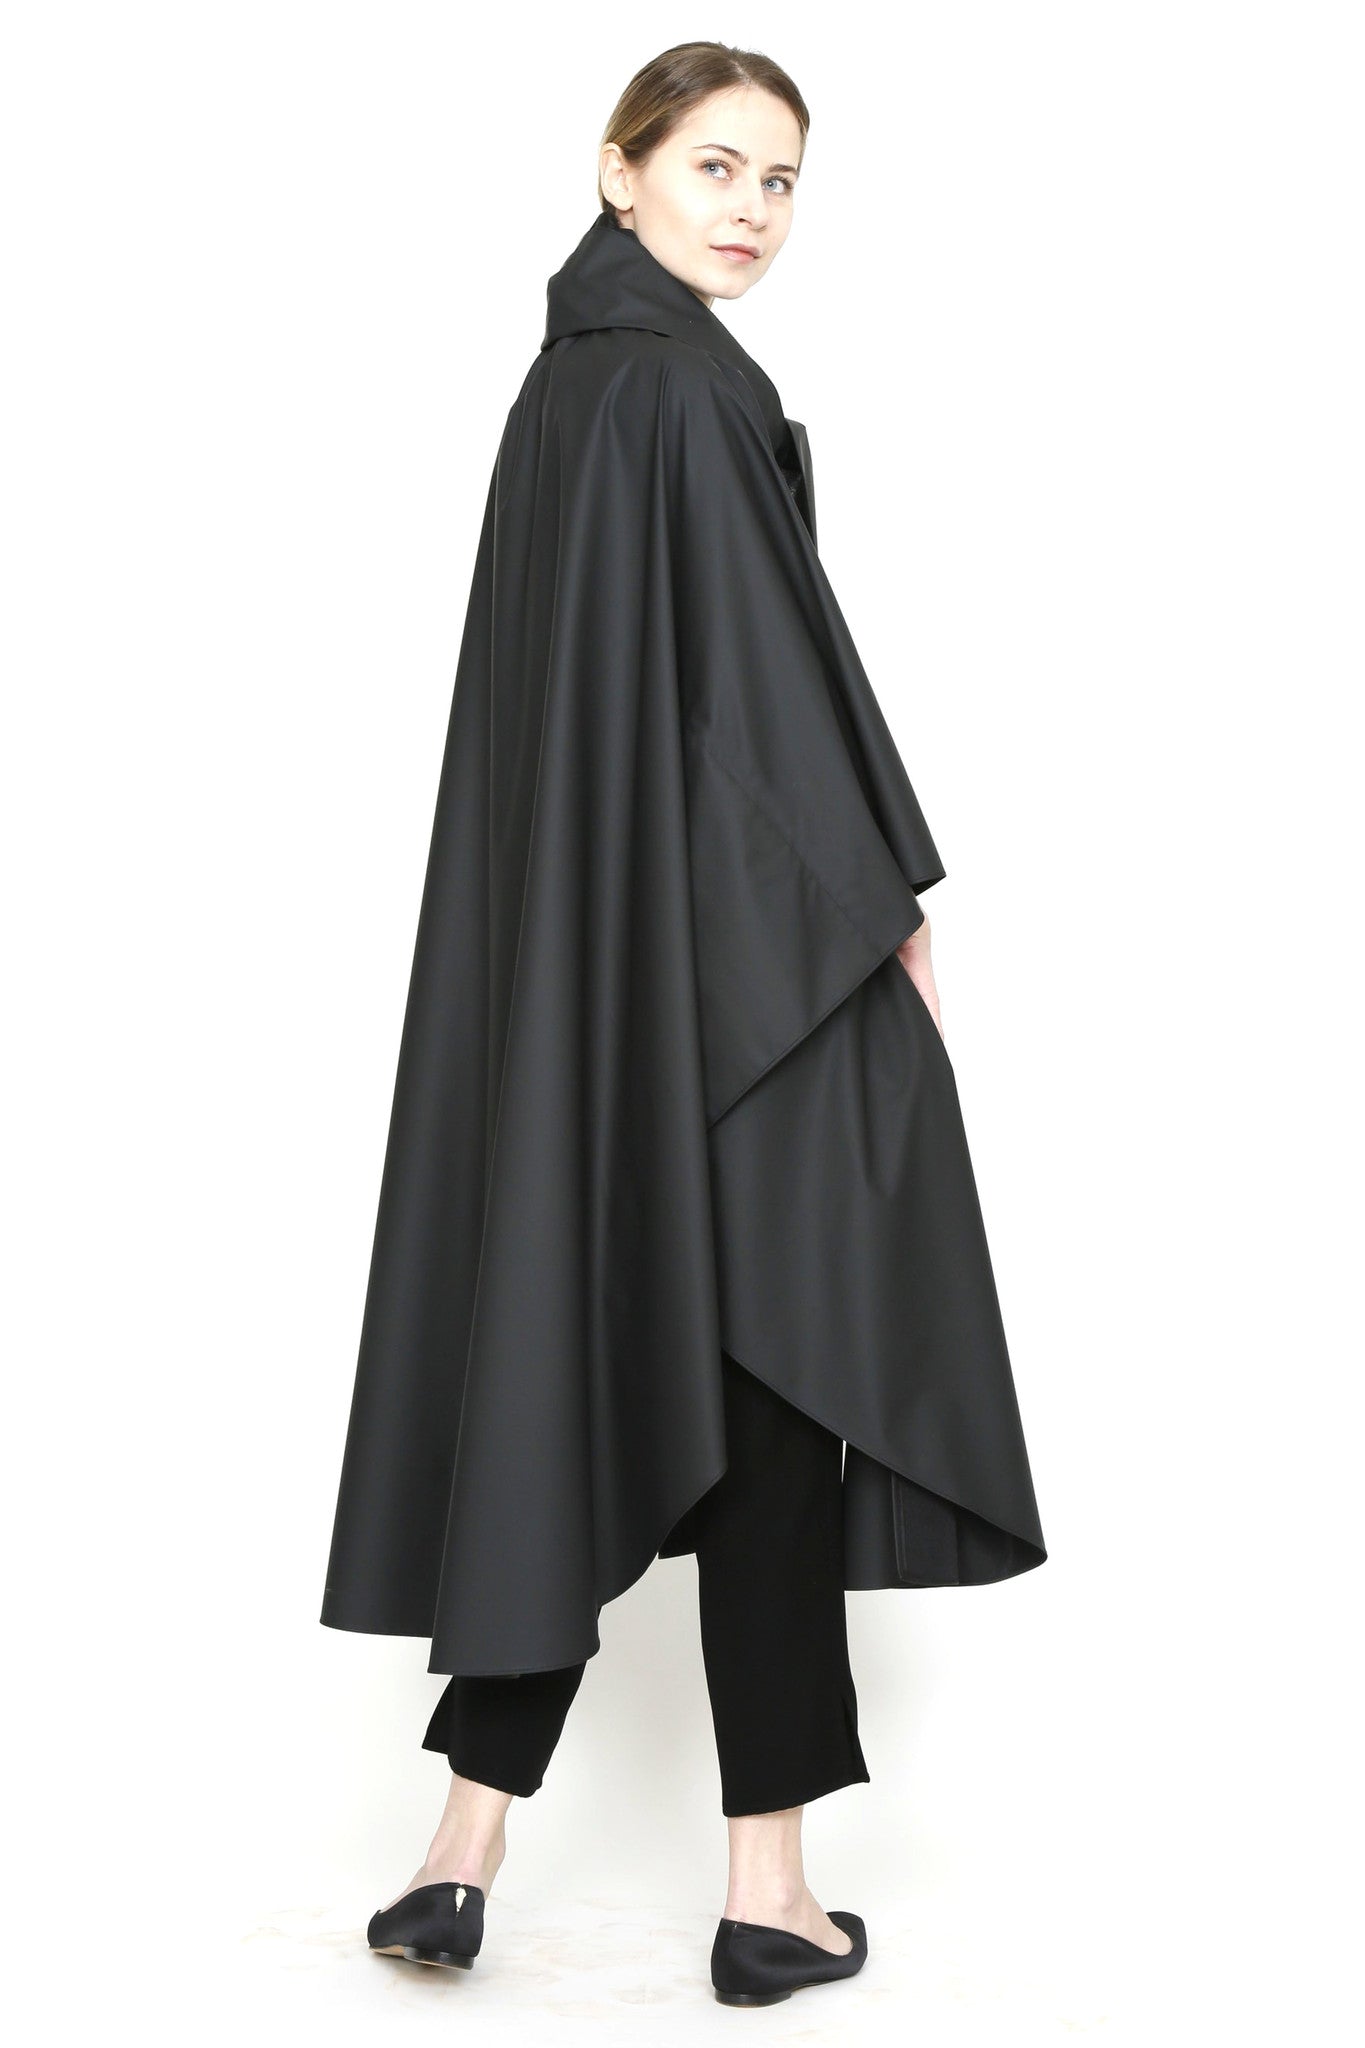 Zero Waste Sustainable One-Size-Fits-All Rain Cape in Water-Repellent Fabric-6